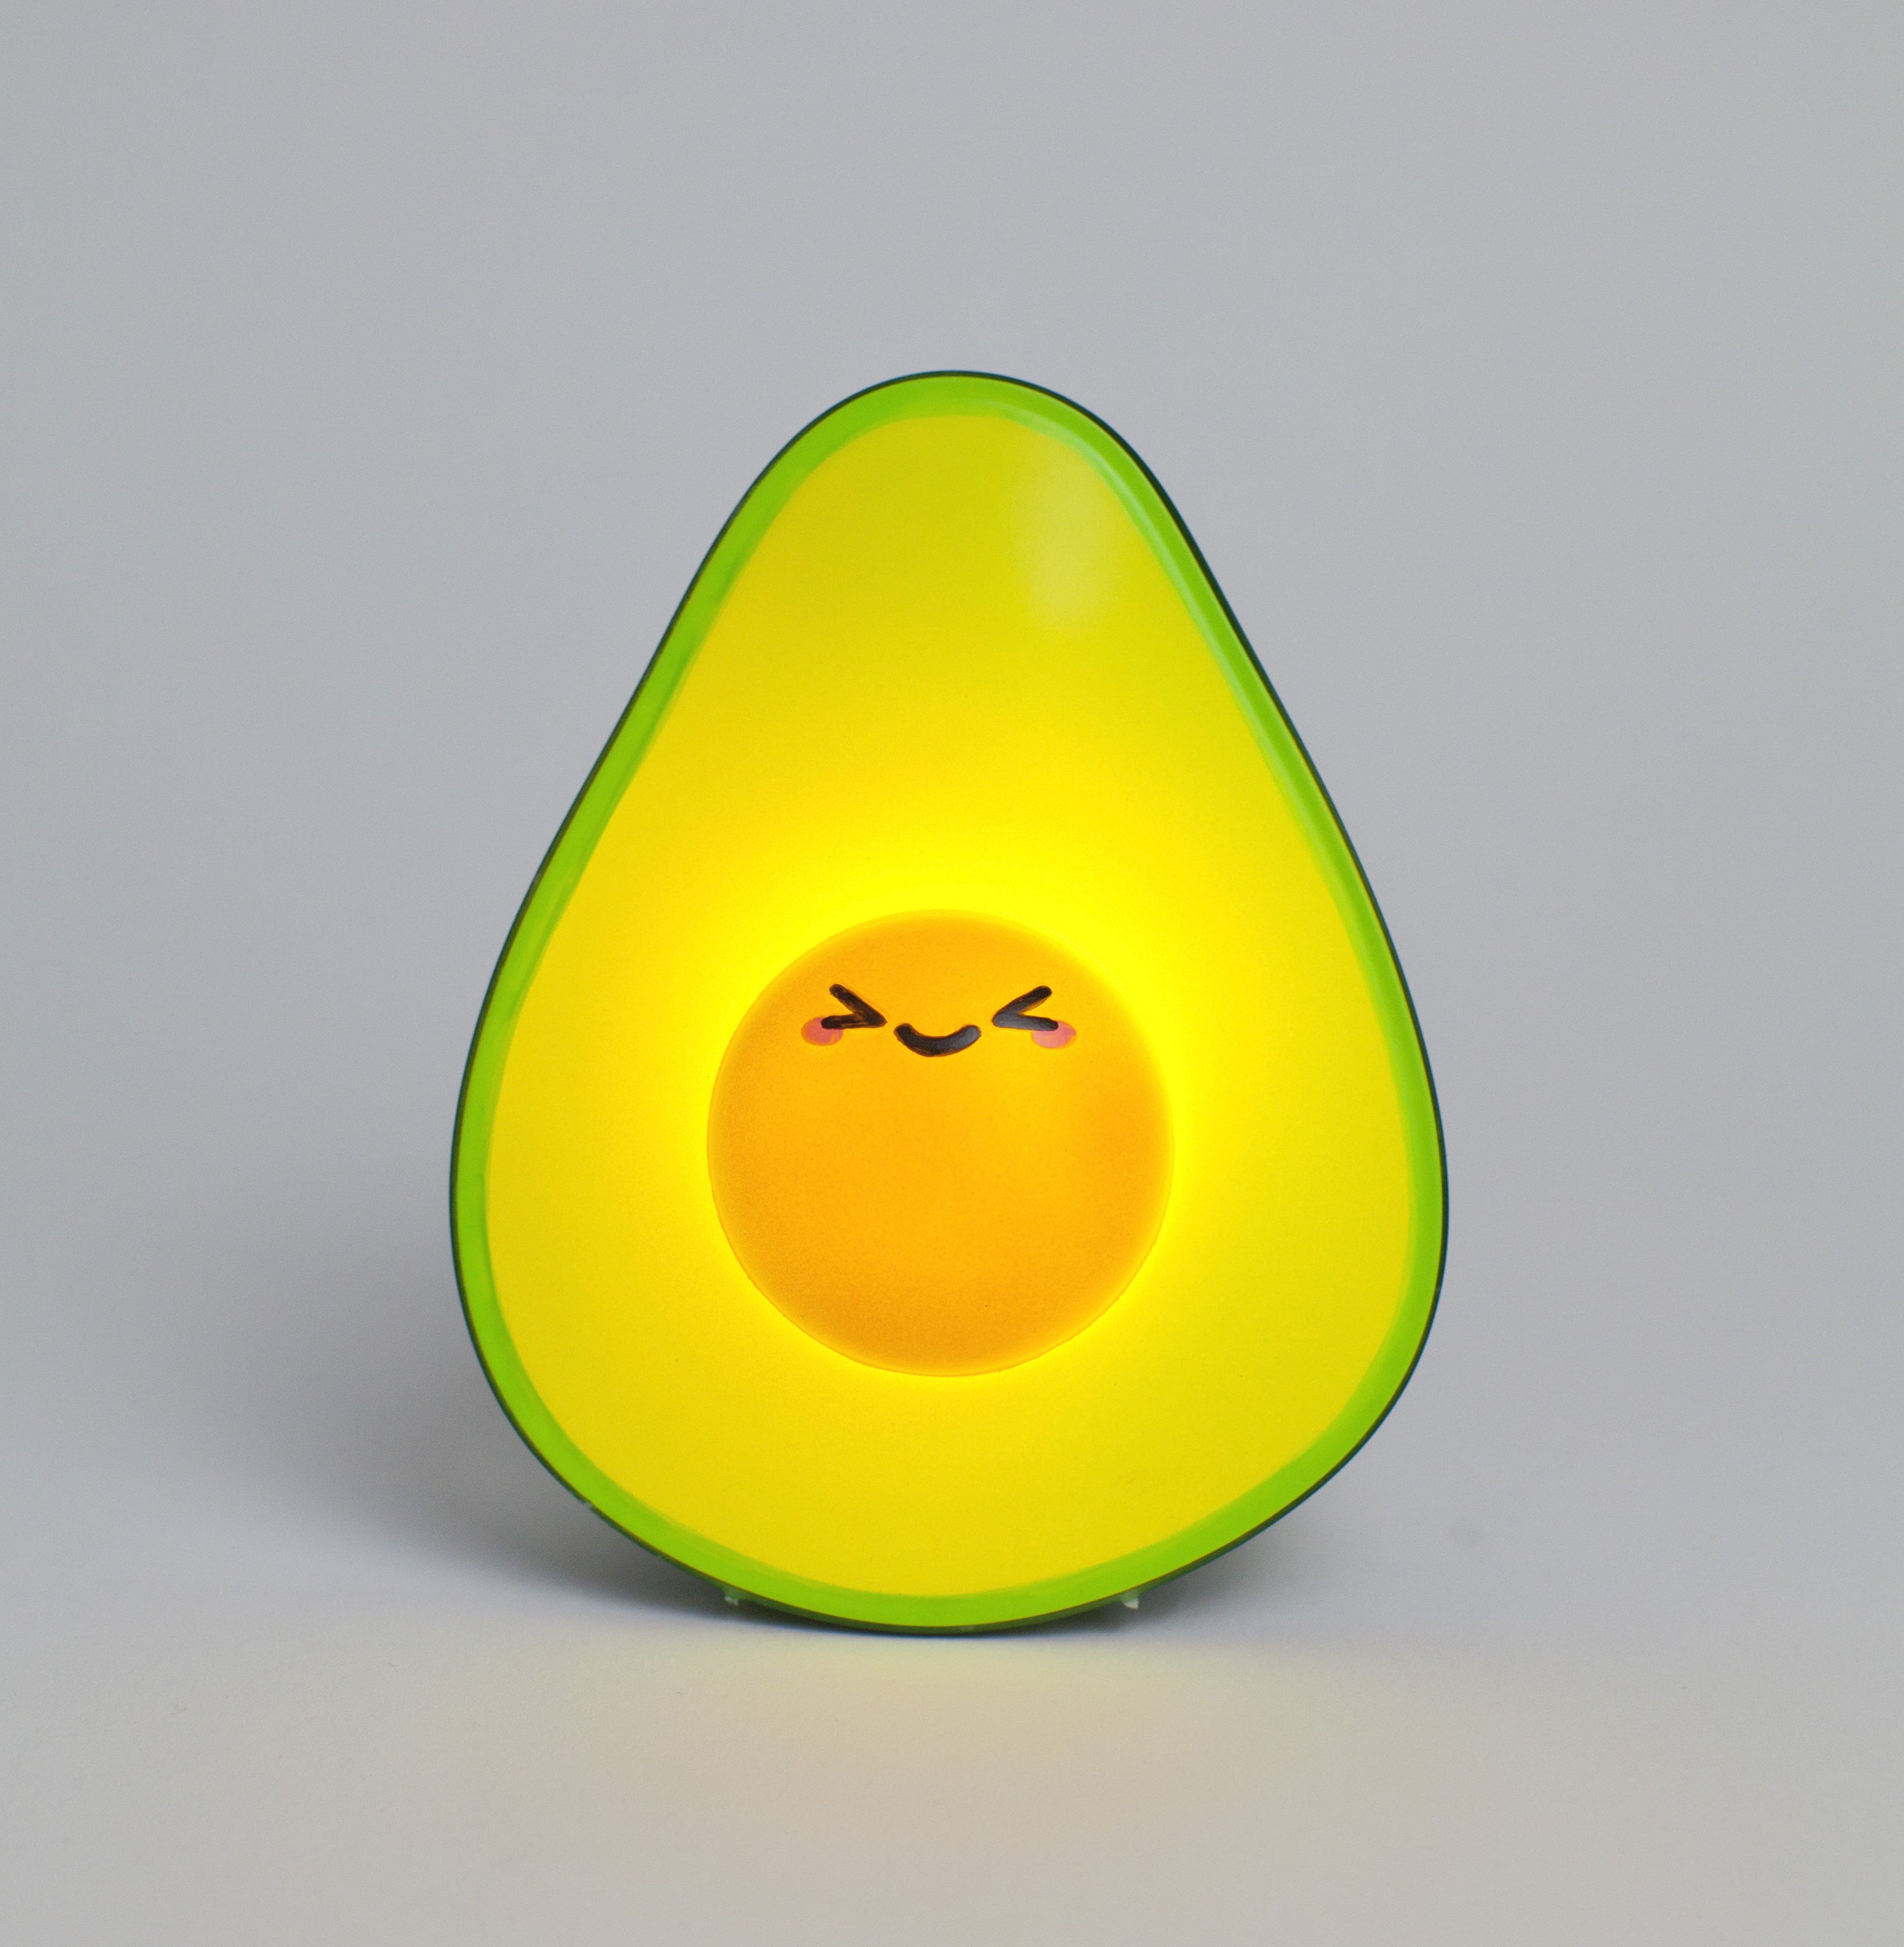 The LED light-up avocado with happy illustrated face